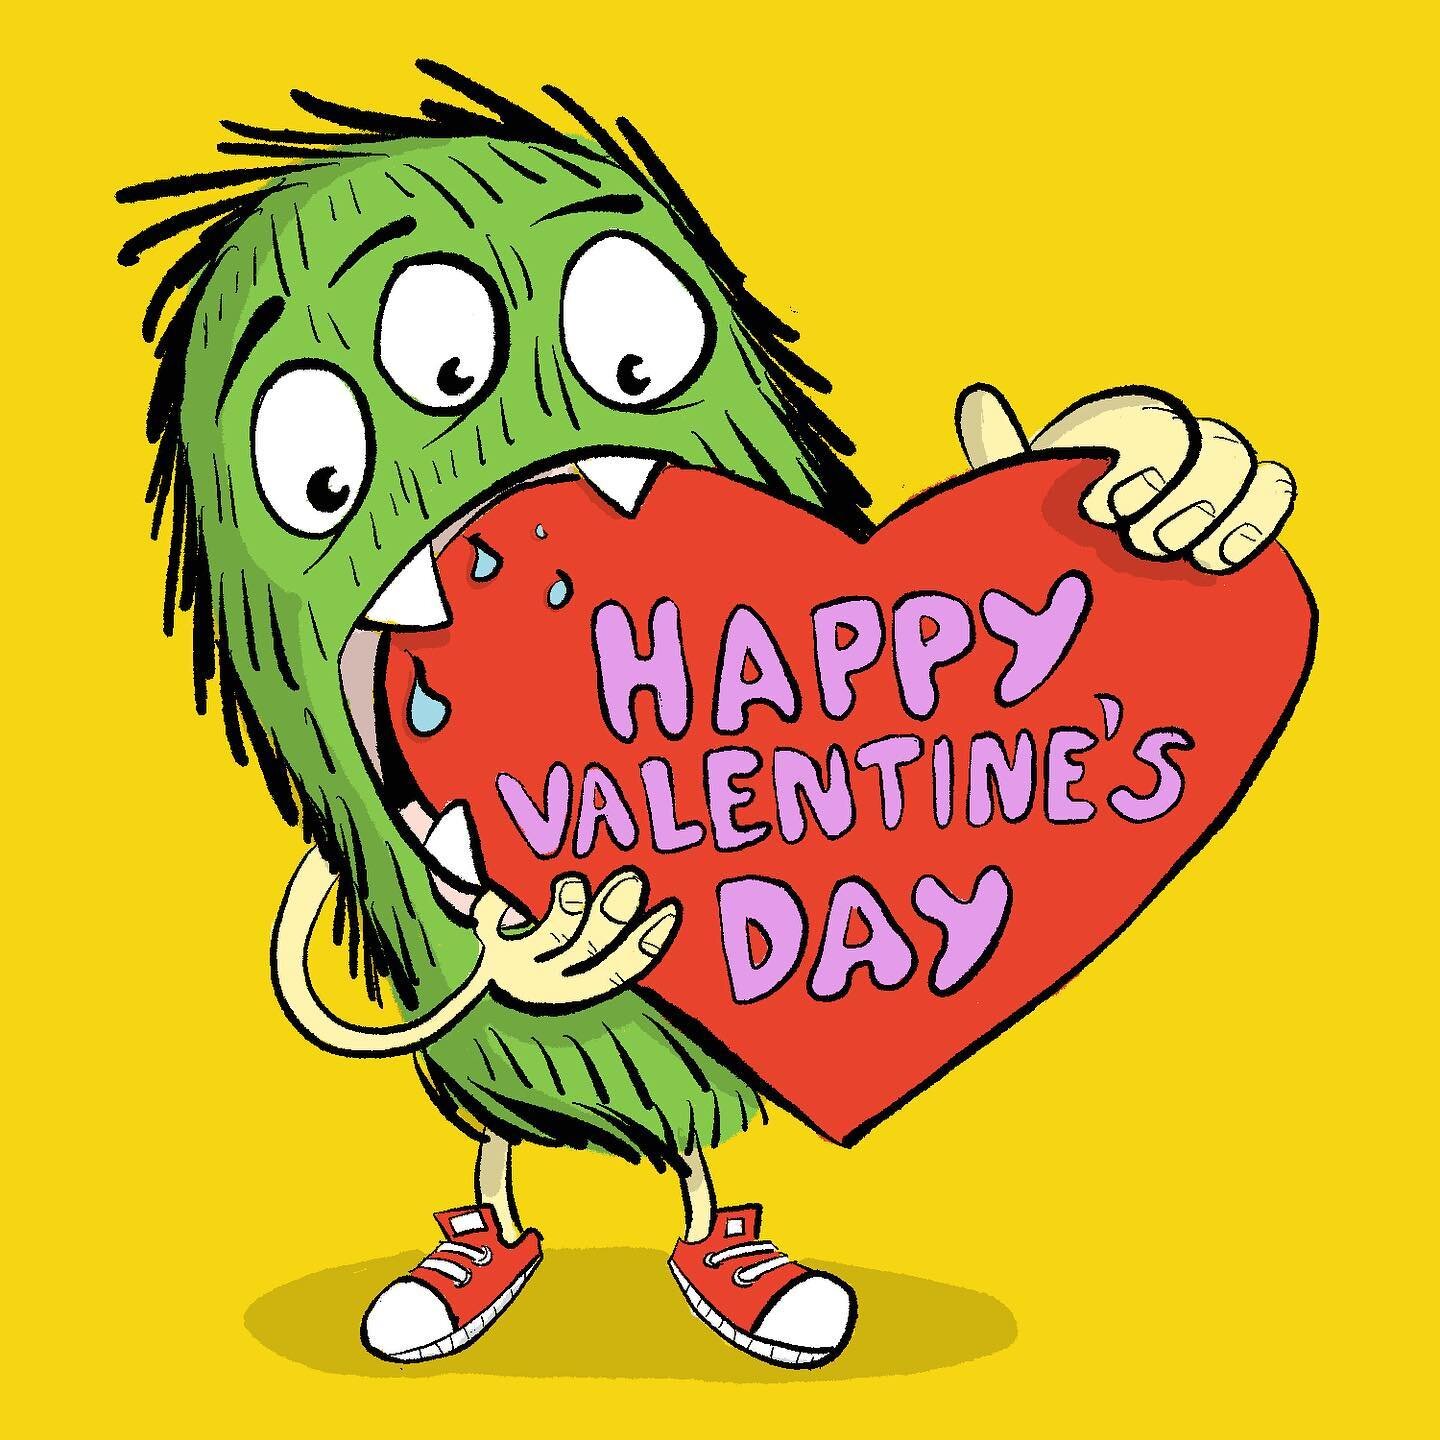 It&rsquo;s not too late to show someone how much you care, with a freaked out and totally FREE Valentine&rsquo;s card from Monsters Rule! Color it in with the kiddos, add a tender personal note (or coupon for breakfast in bed 🥞&nbsp;🍳&nbsp;🥓)&nbsp